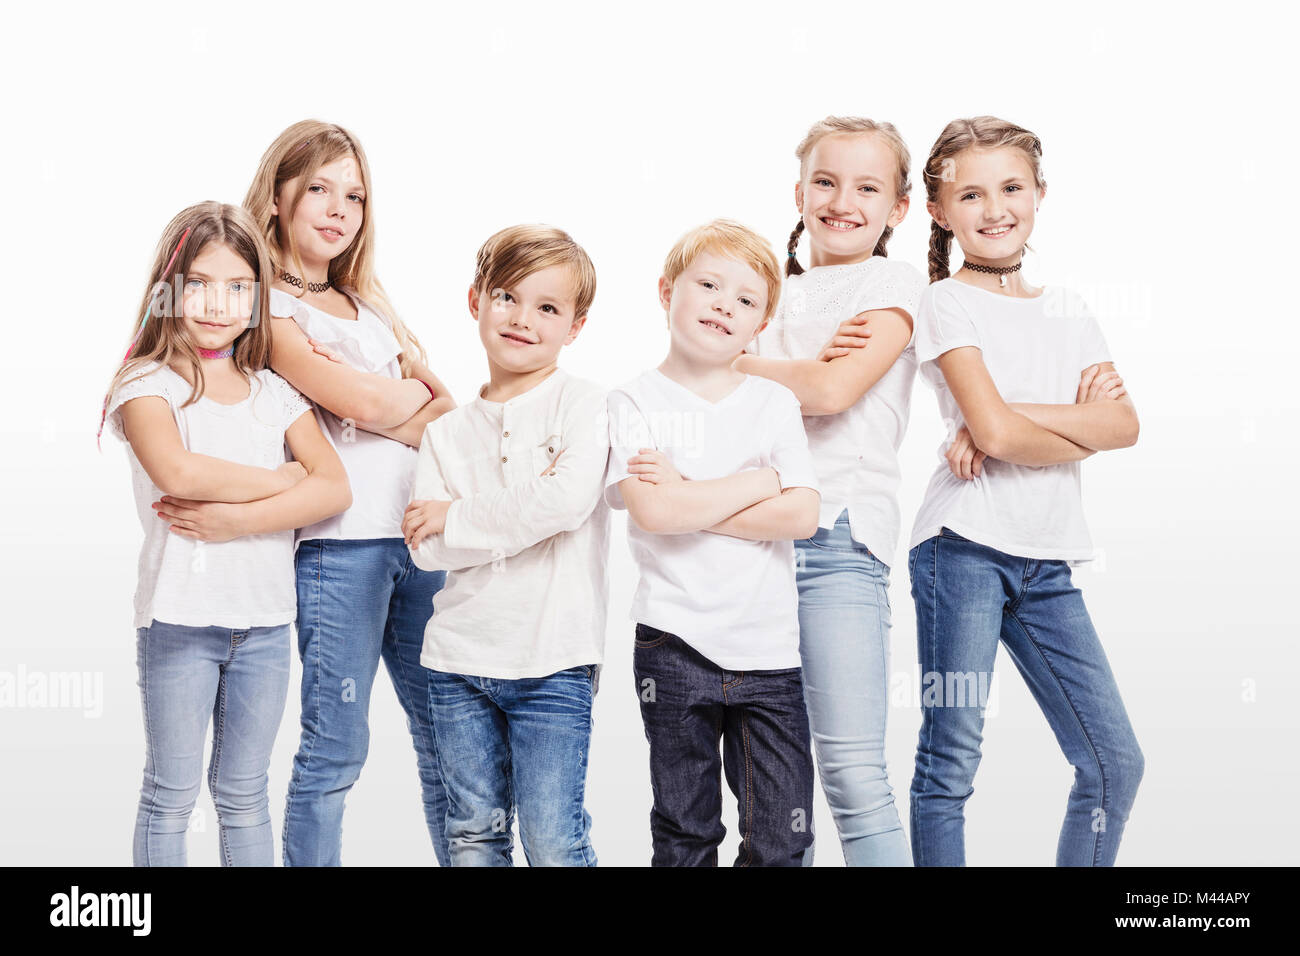 Studio portrait of two boys and four girls posing with arms folded Stock Photo